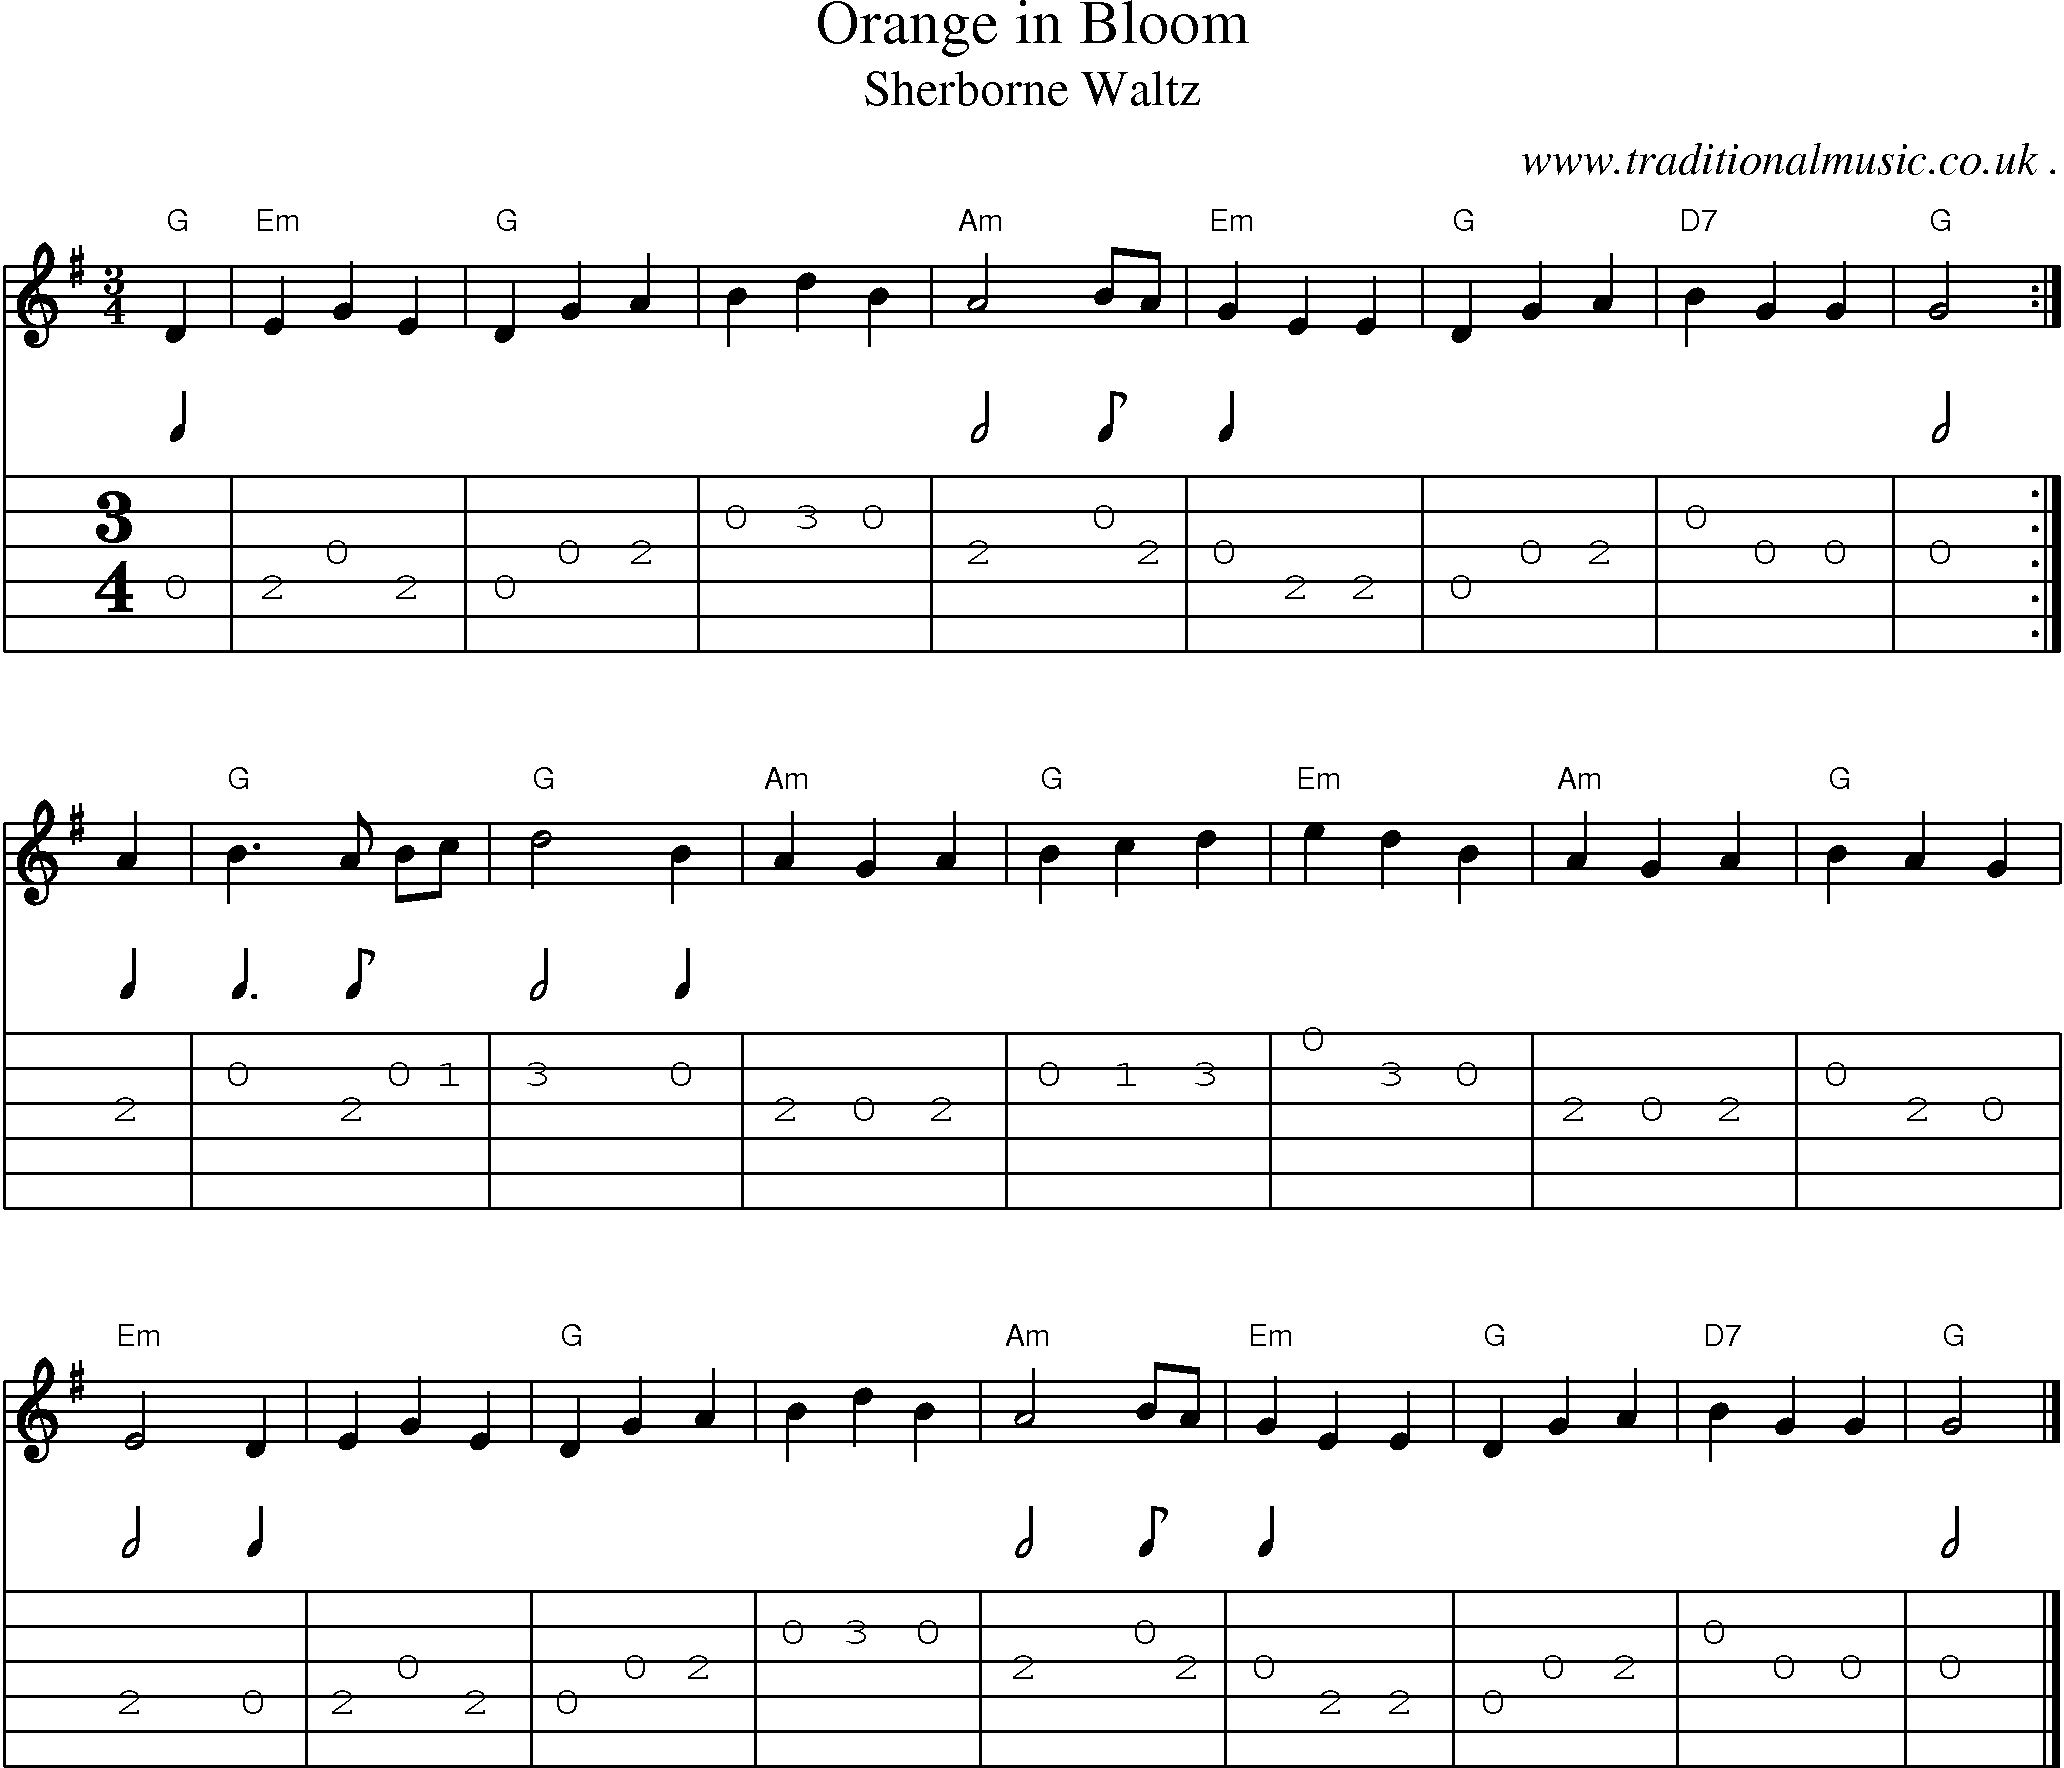 Music Score and Guitar Tabs for Orange in Bloom